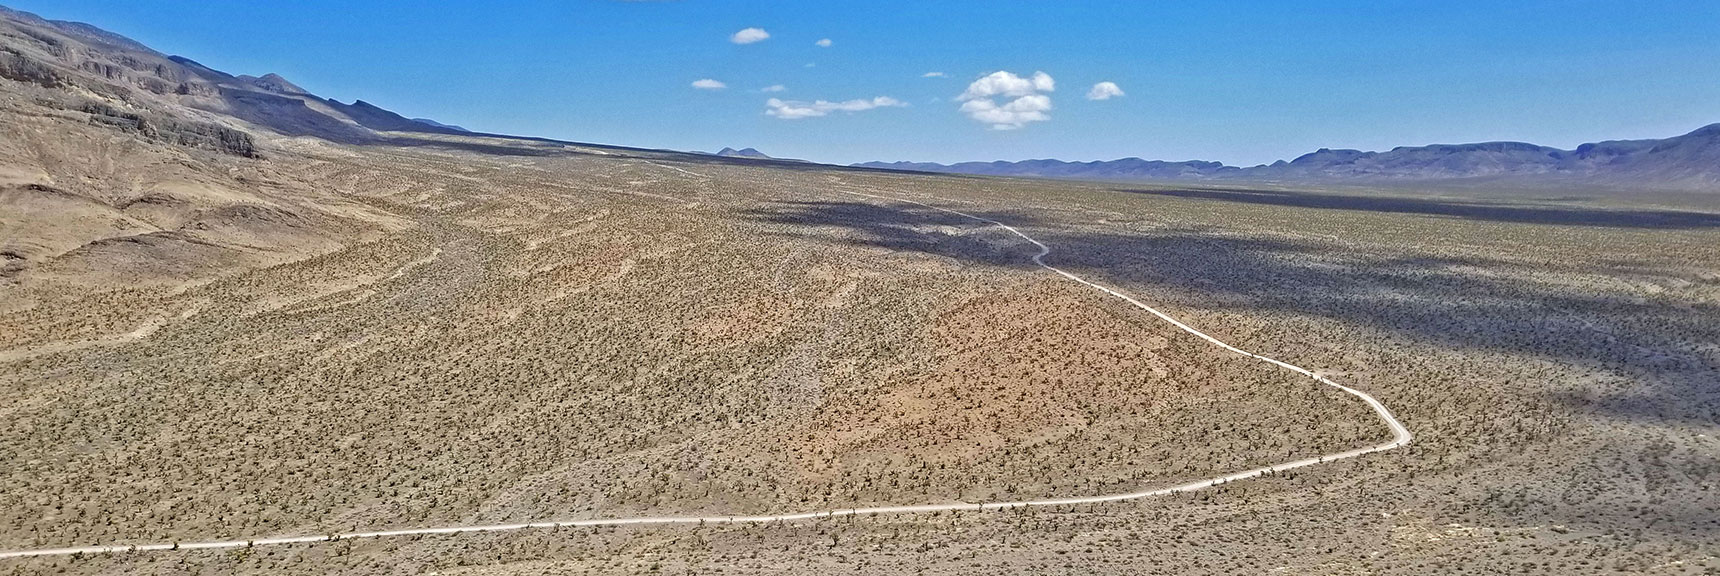 View of Huge Valley Blanketed with Joshua Tree Forest East of the Sheep Range | Fossil Ridge End to End | Sheep Range | Desert National Wildlife Refuge, Nevada